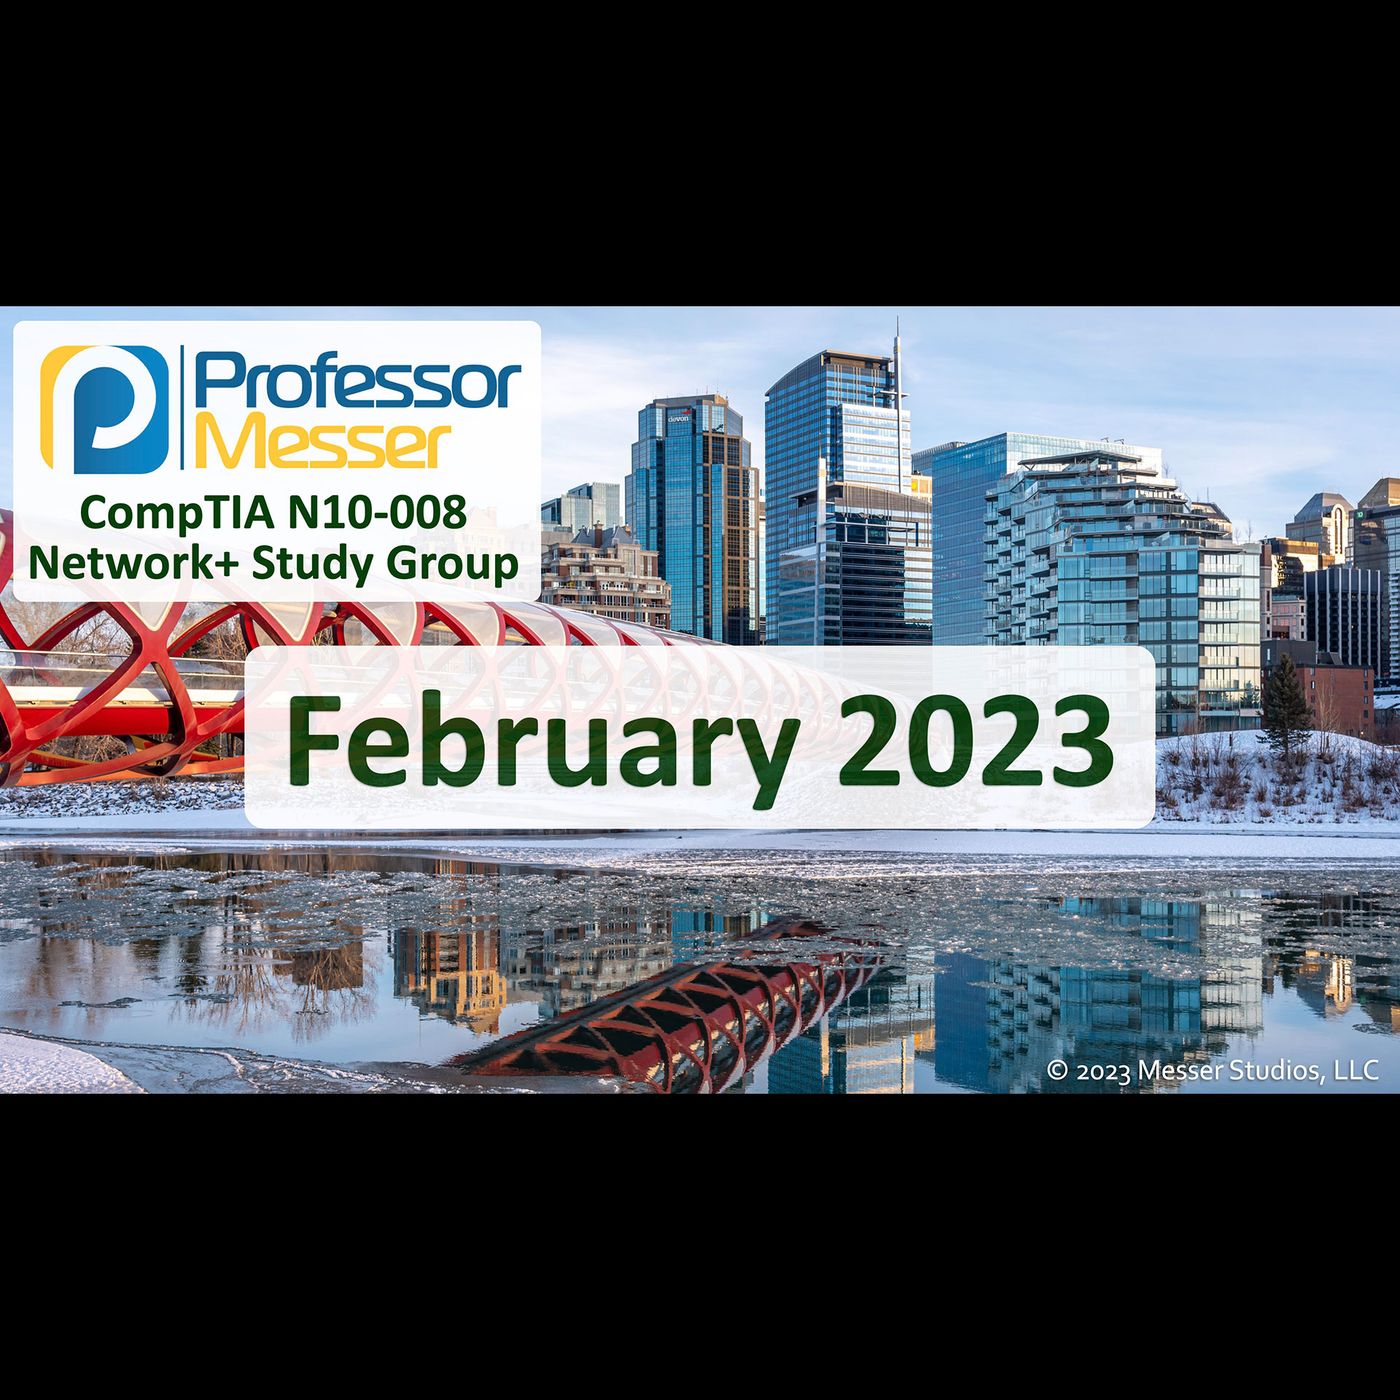 Professor Messer's N10-008 Network+ Study Group After Show - February 2023